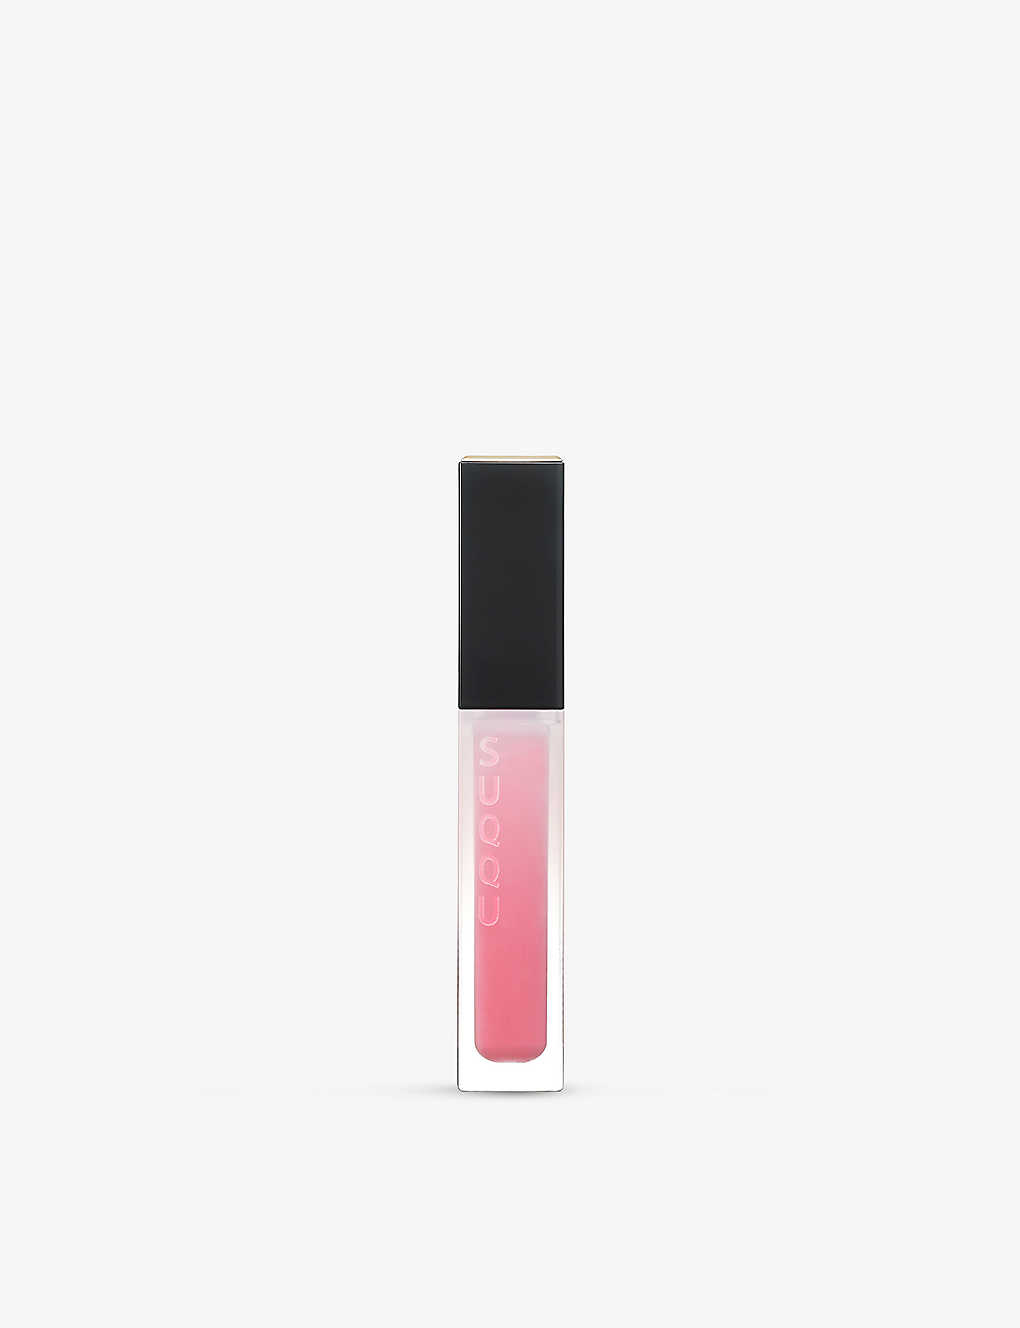 Suqqu 01 Clear Pink Treatment Wrapping Lip Gloss 5.4g